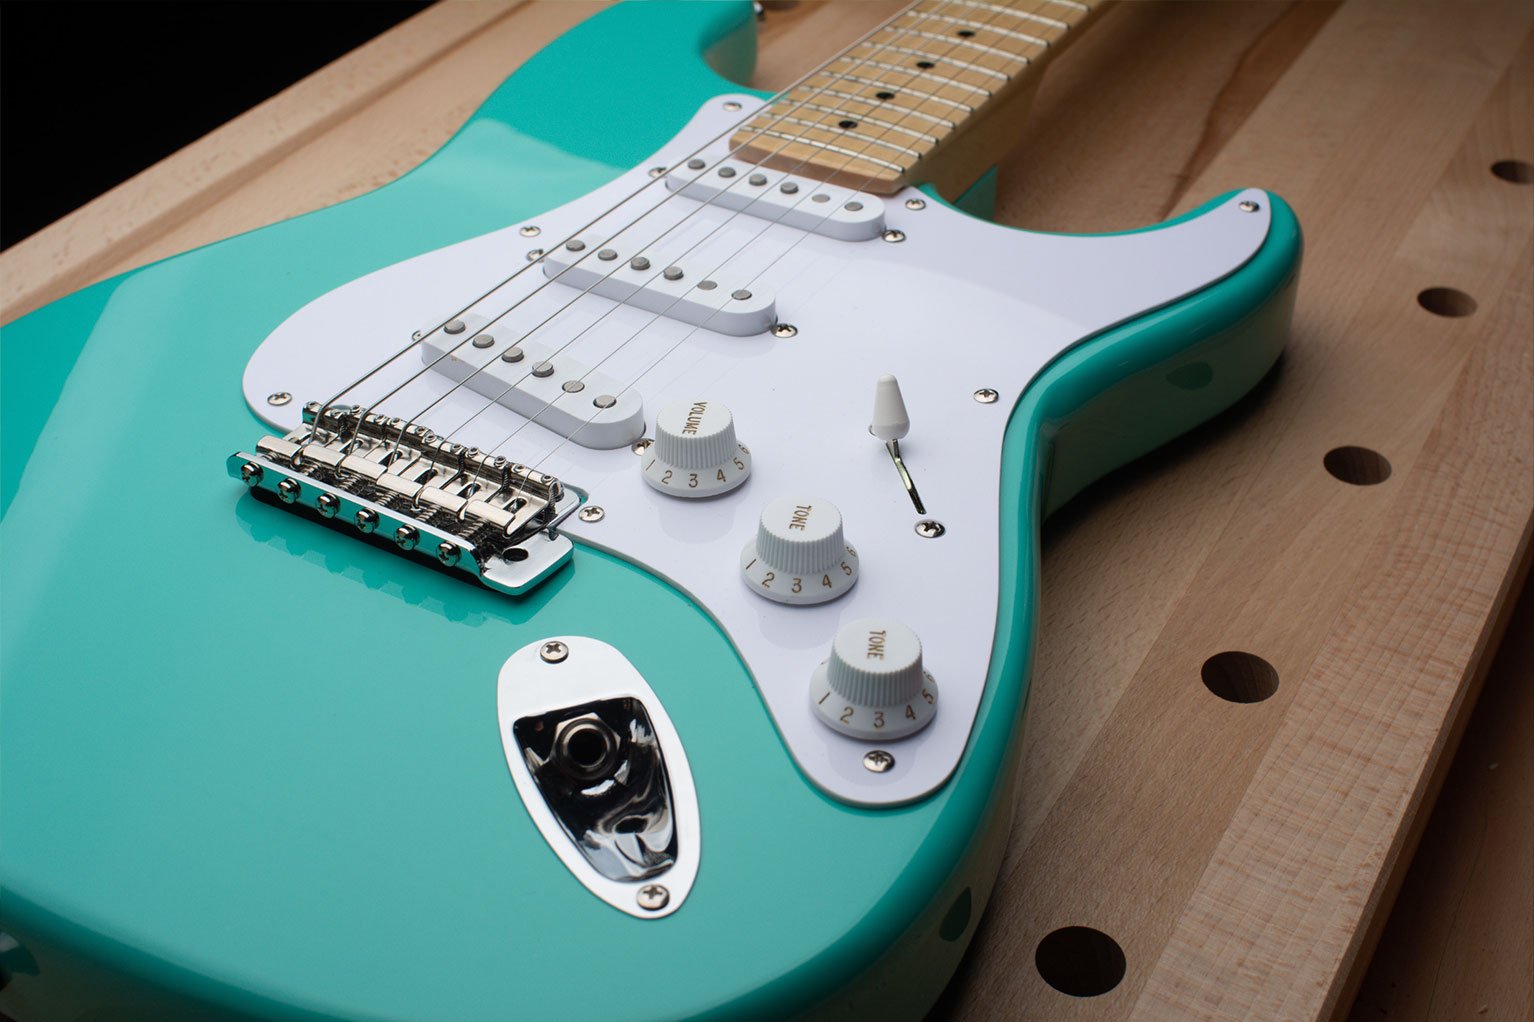 Seafoam green finished S-Style guitar kit with white pickguard